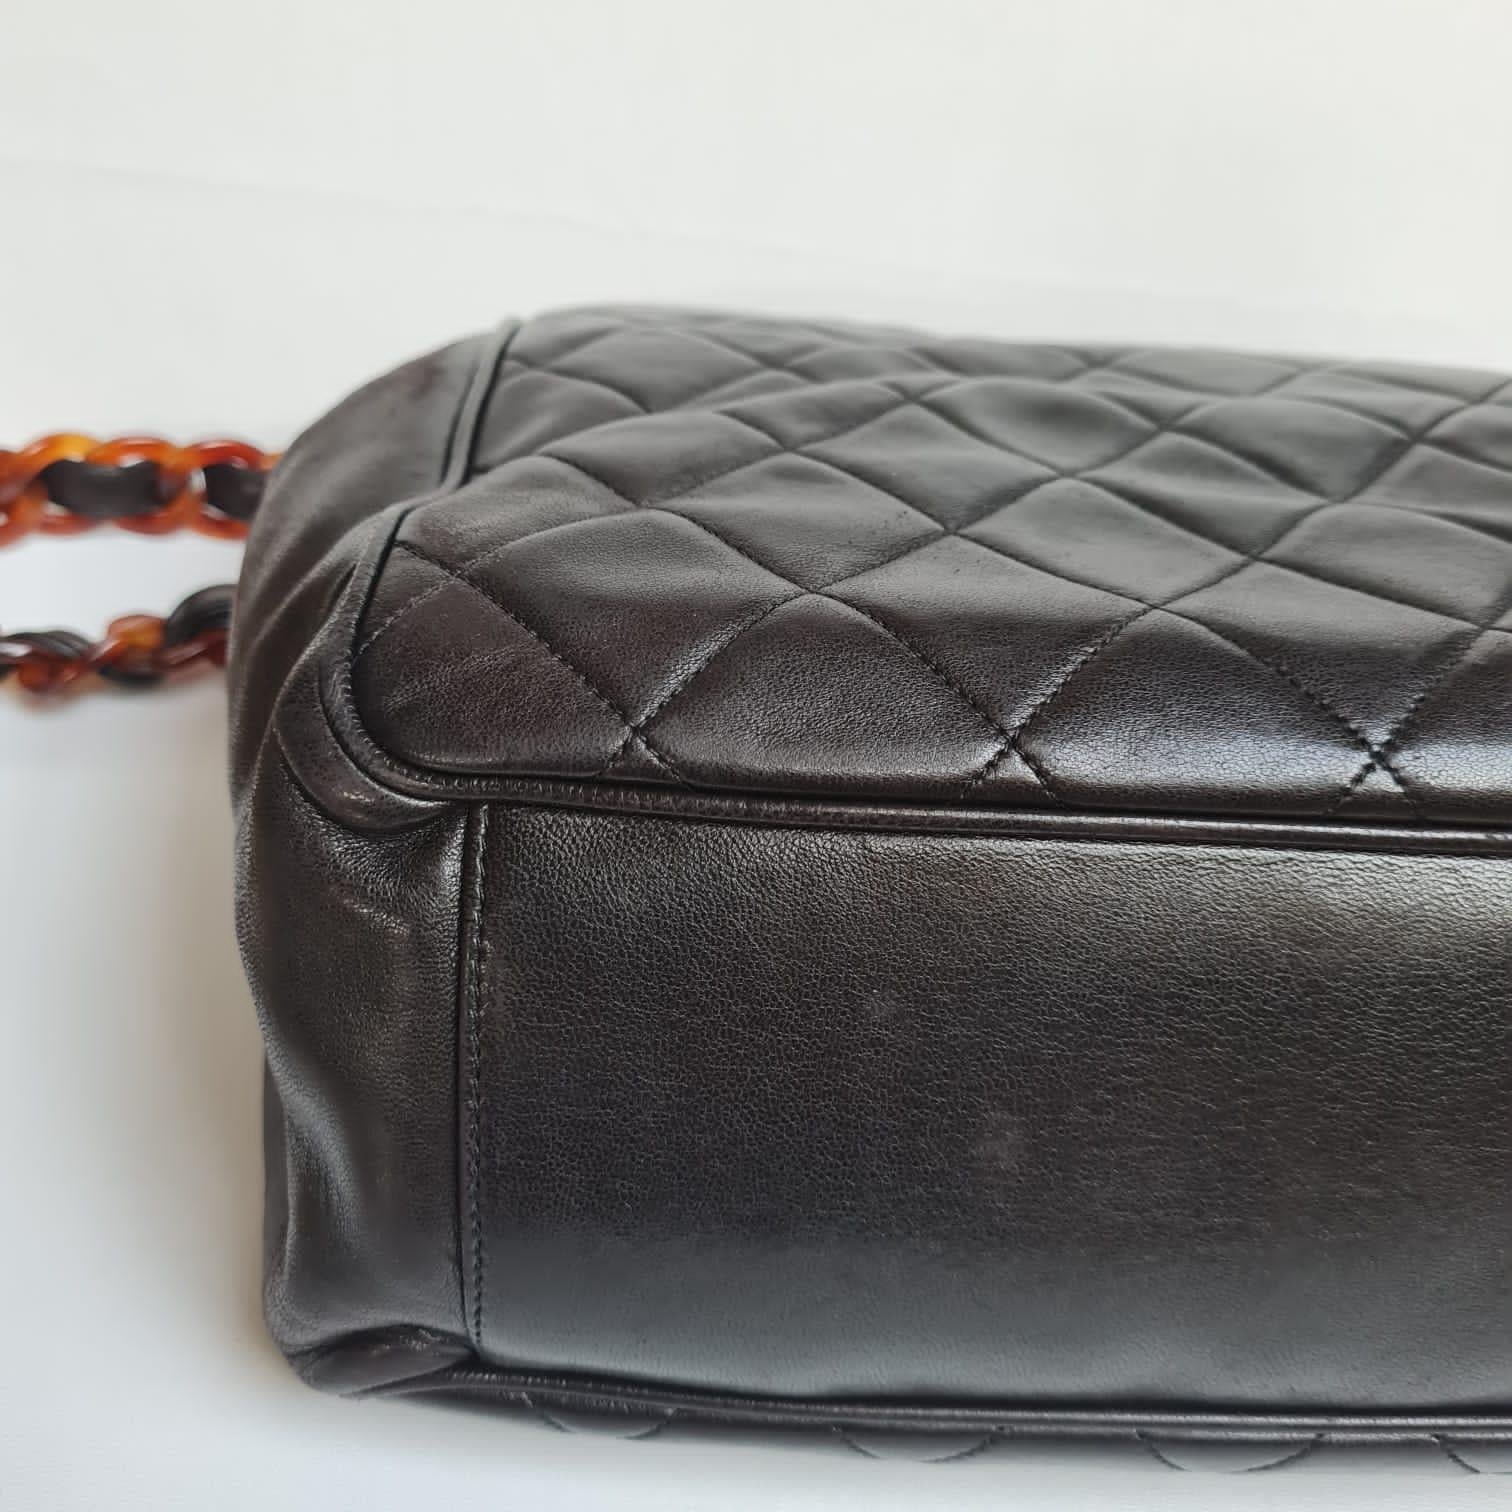 Rare Vintage 1990s Chanel Black Quilted Tortoiseshell Round Flap Bag 5